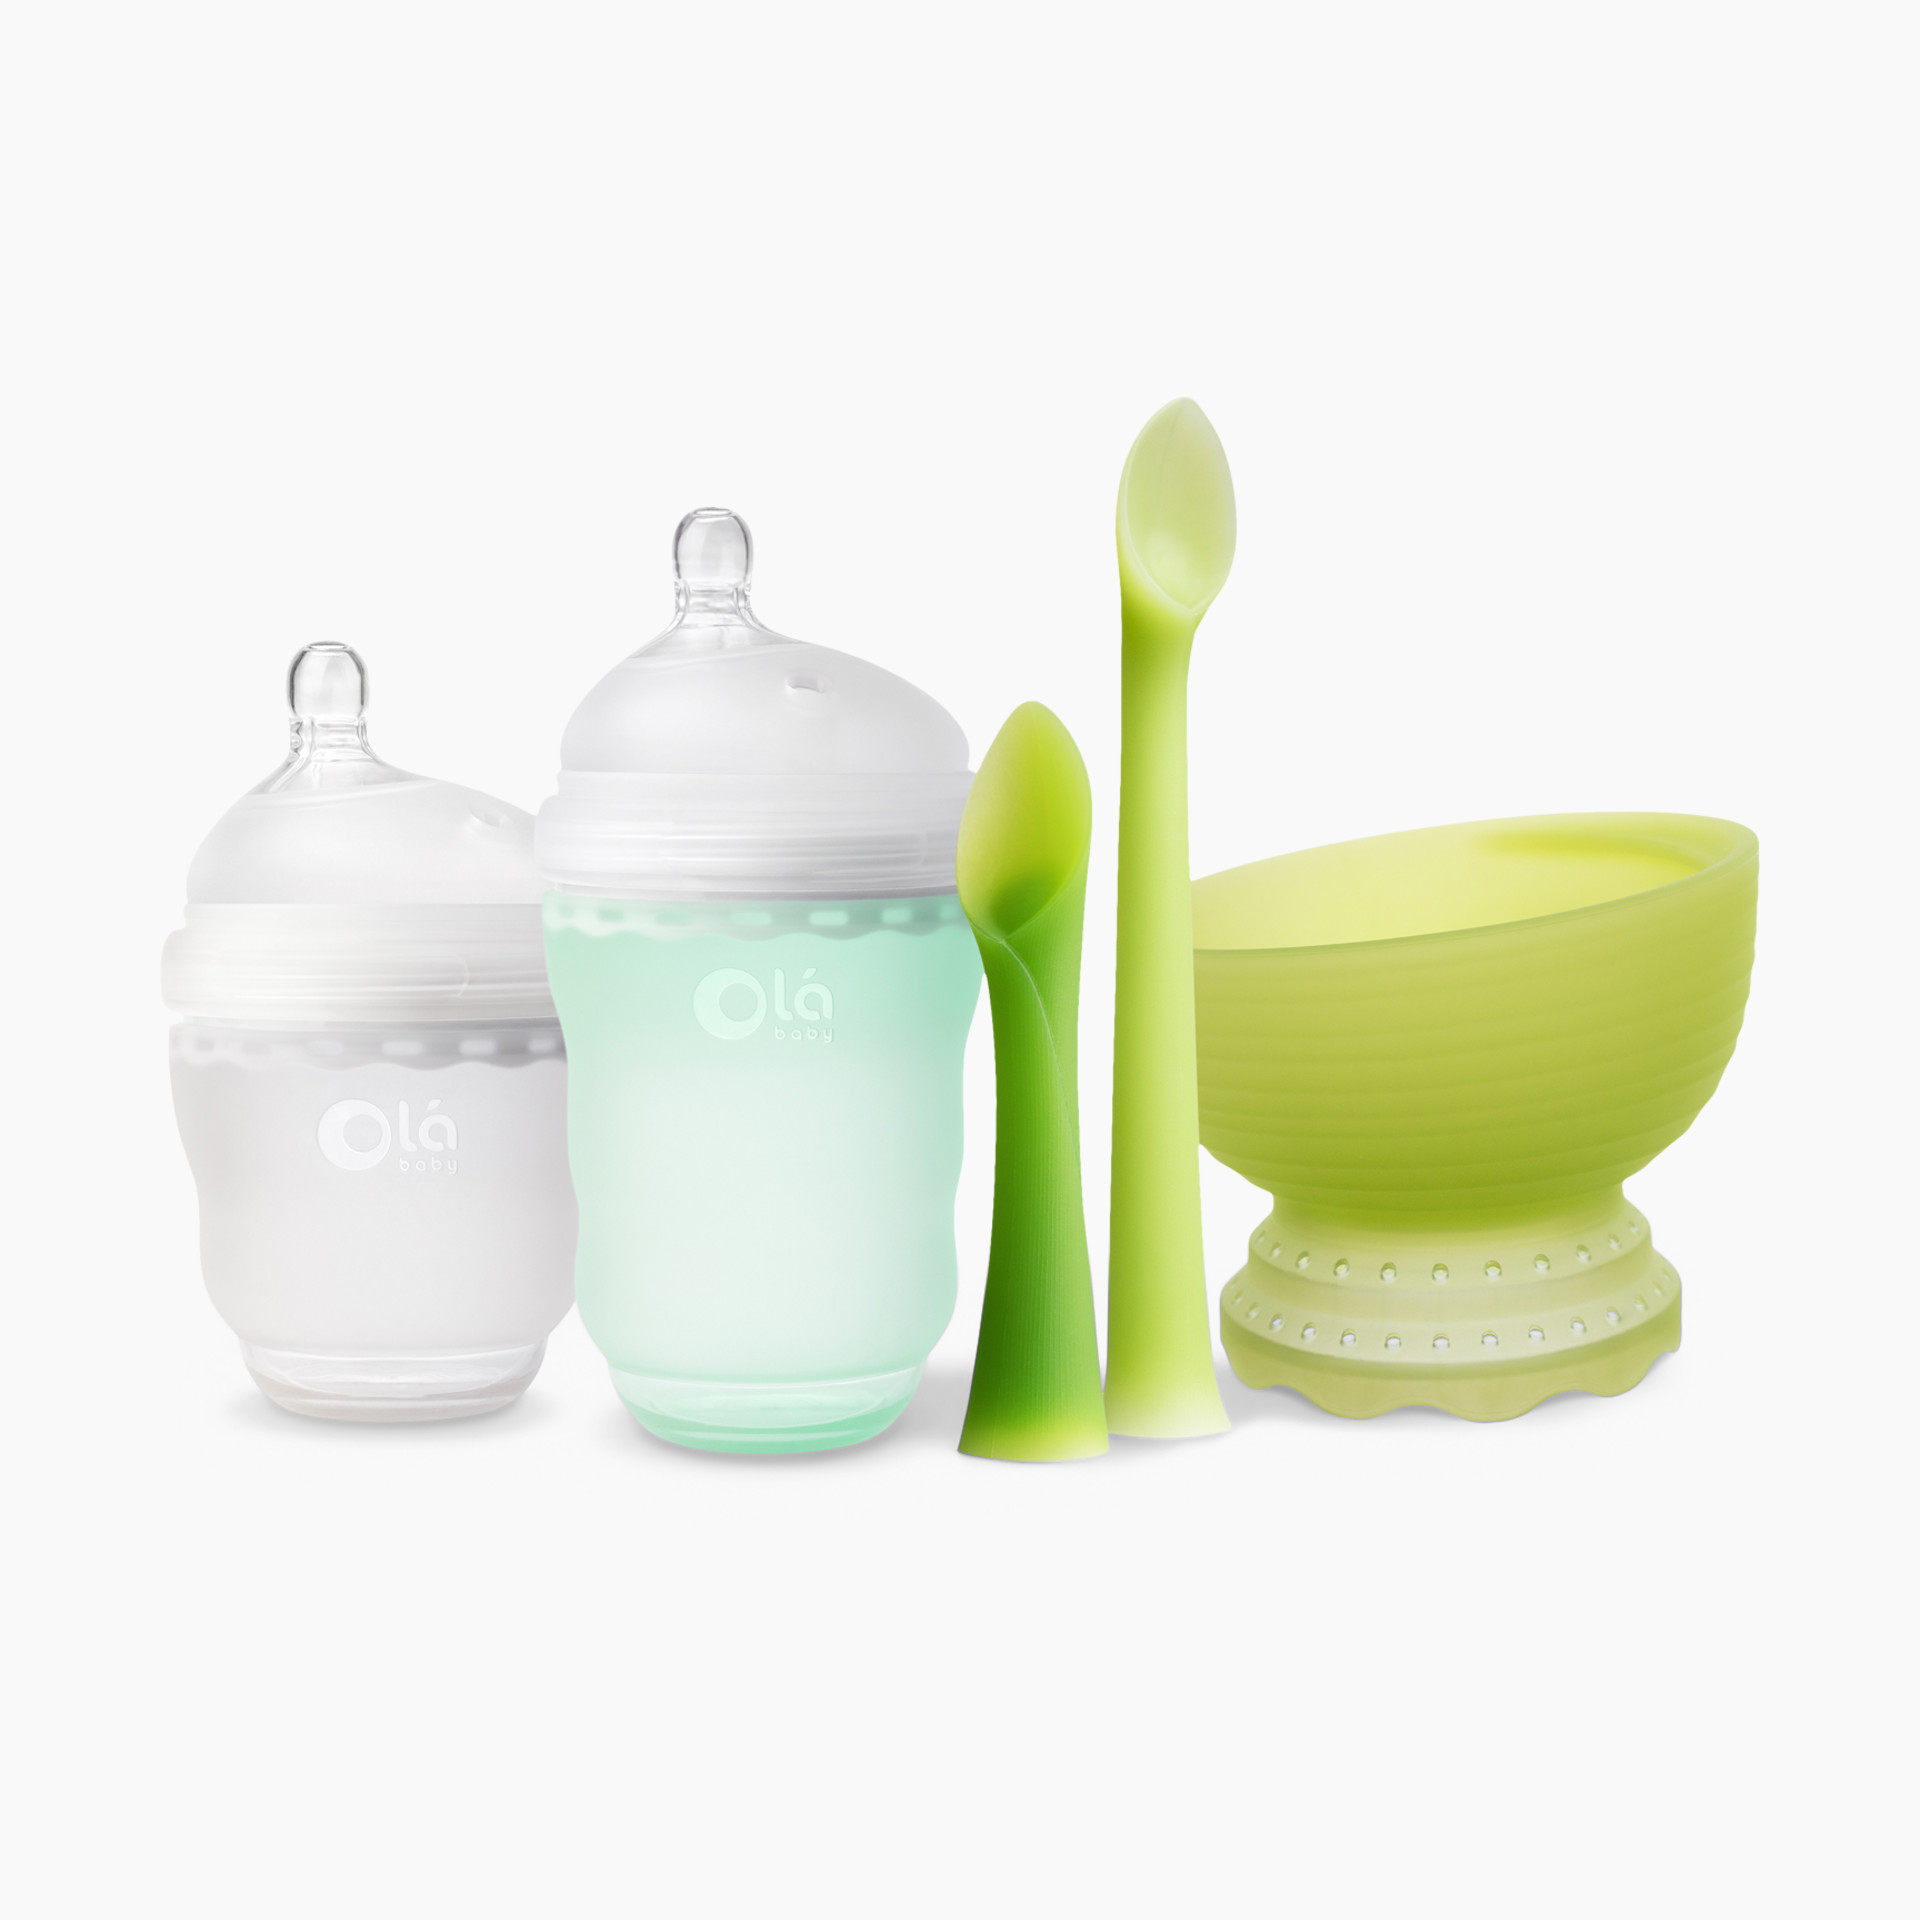 Olababy Baby Training Spoon (2-Pack)